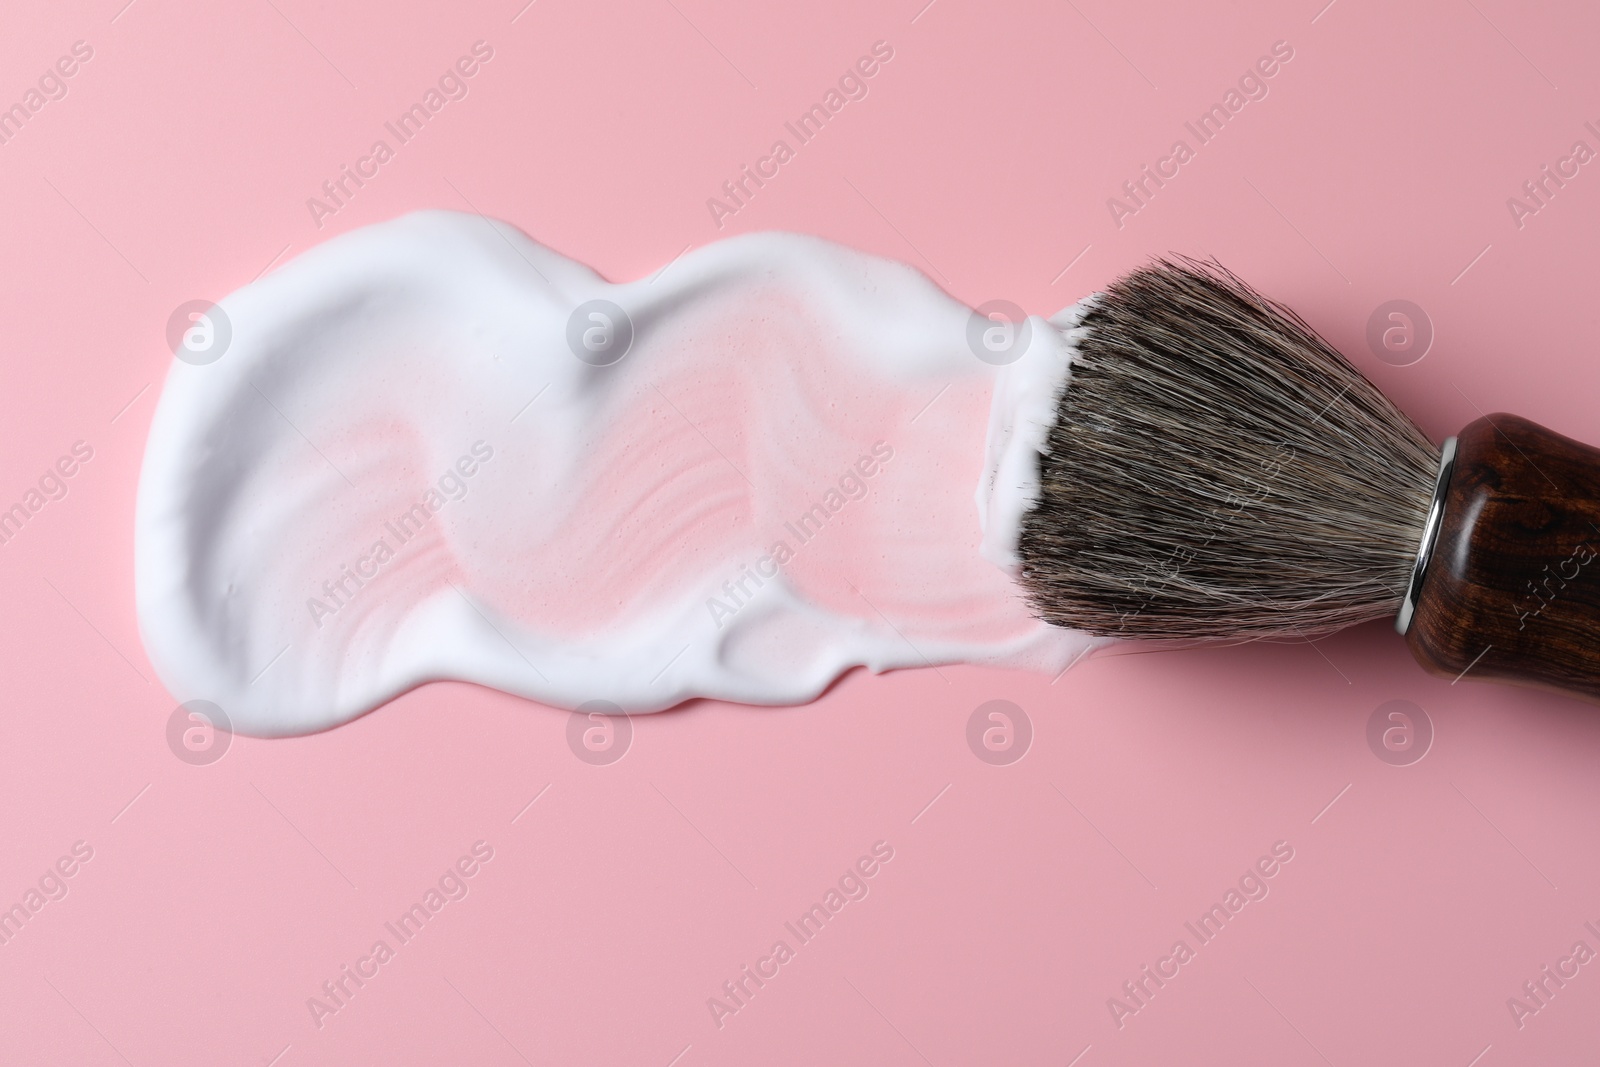 Photo of Brush with shaving foam on pink background, top view